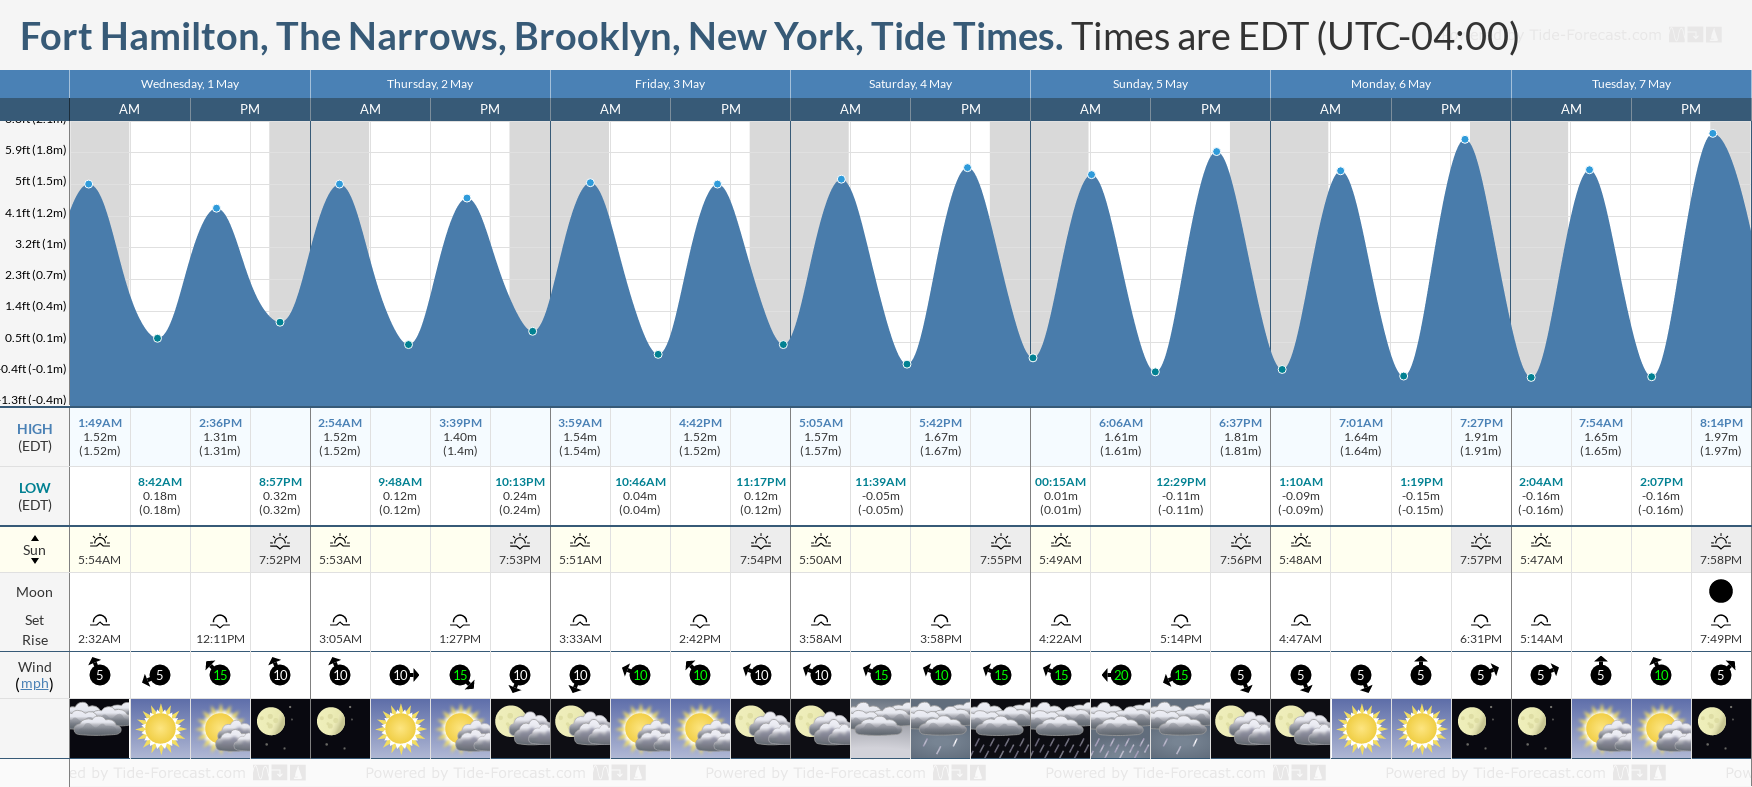 Fort Hamilton, The Narrows, Brooklyn, New York Tide Chart including high and low tide tide times for the next 7 days